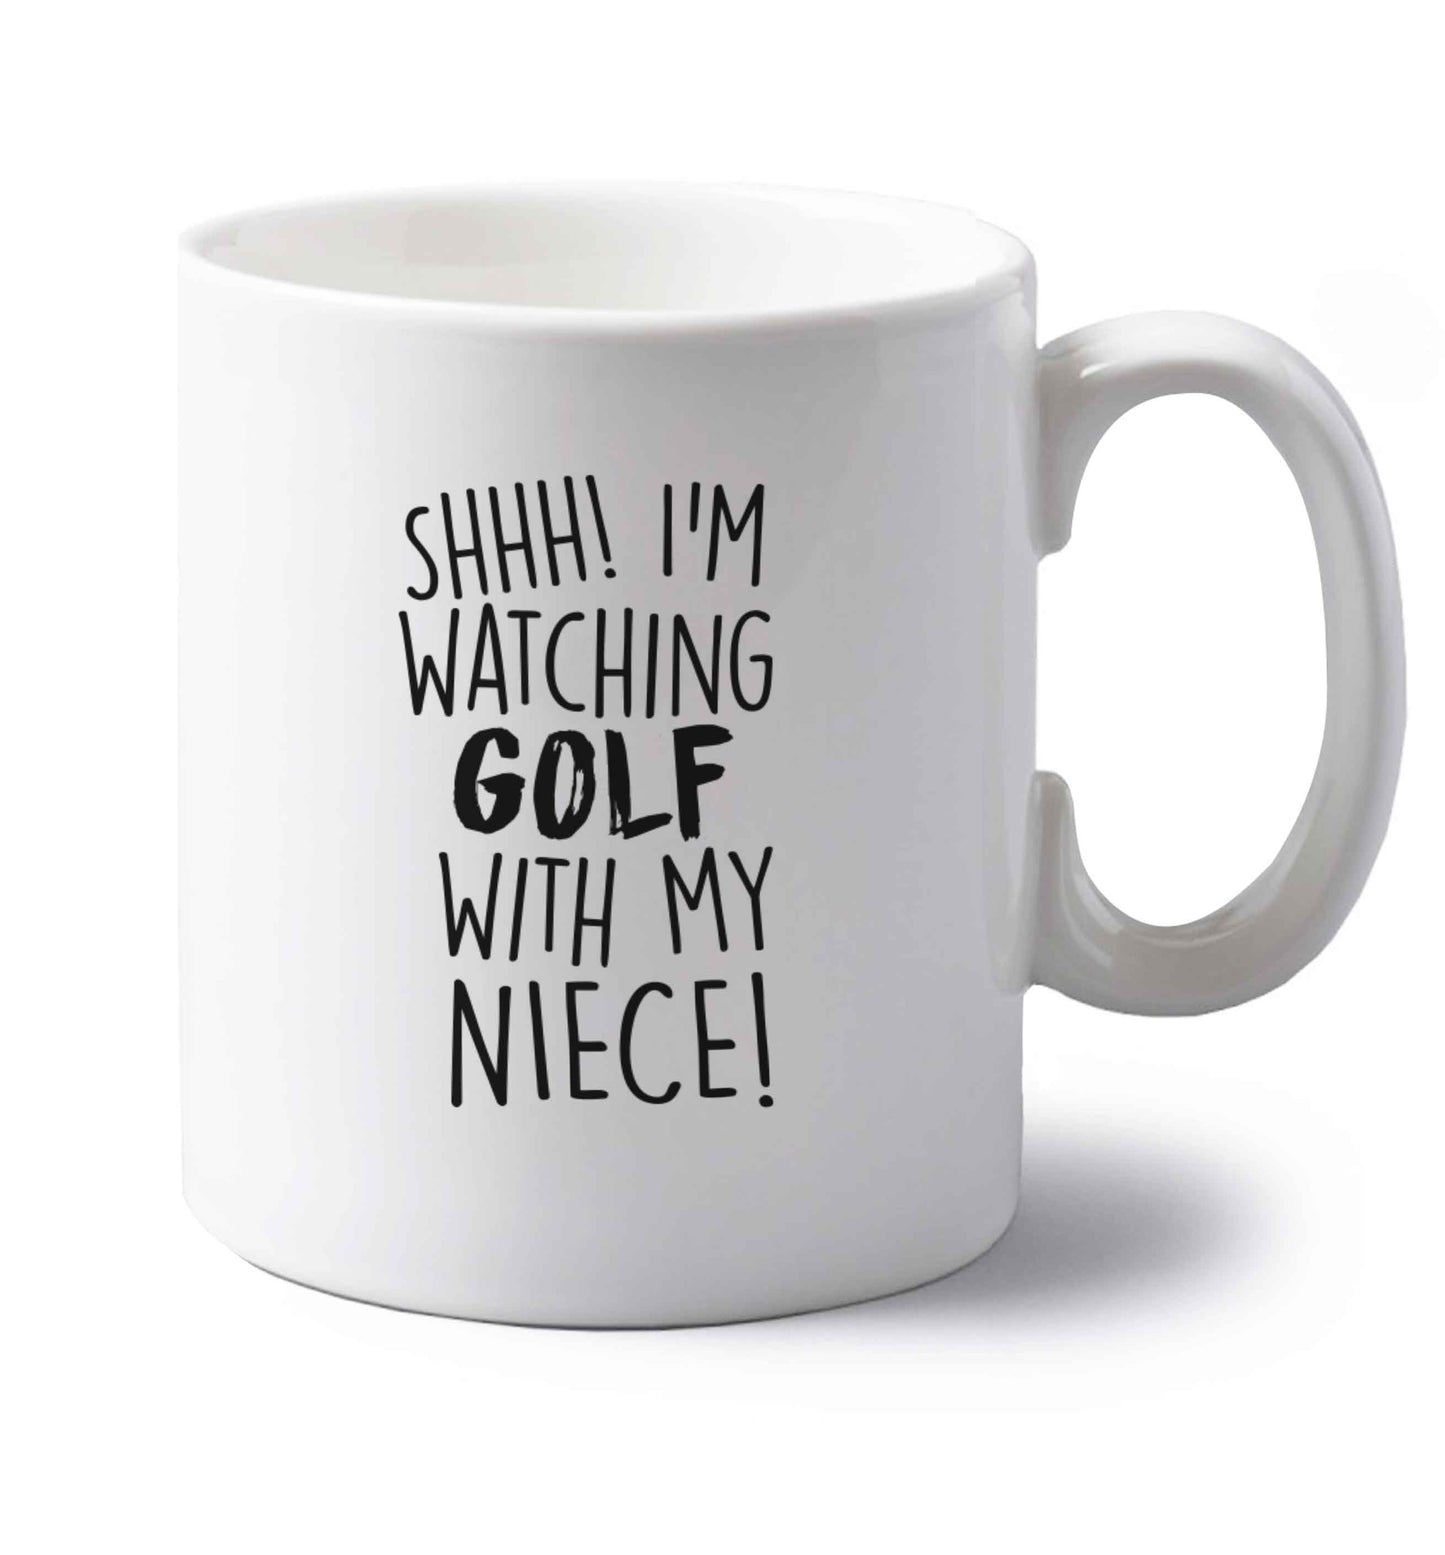 Shh I'm watching golf with my niece left handed white ceramic mug 